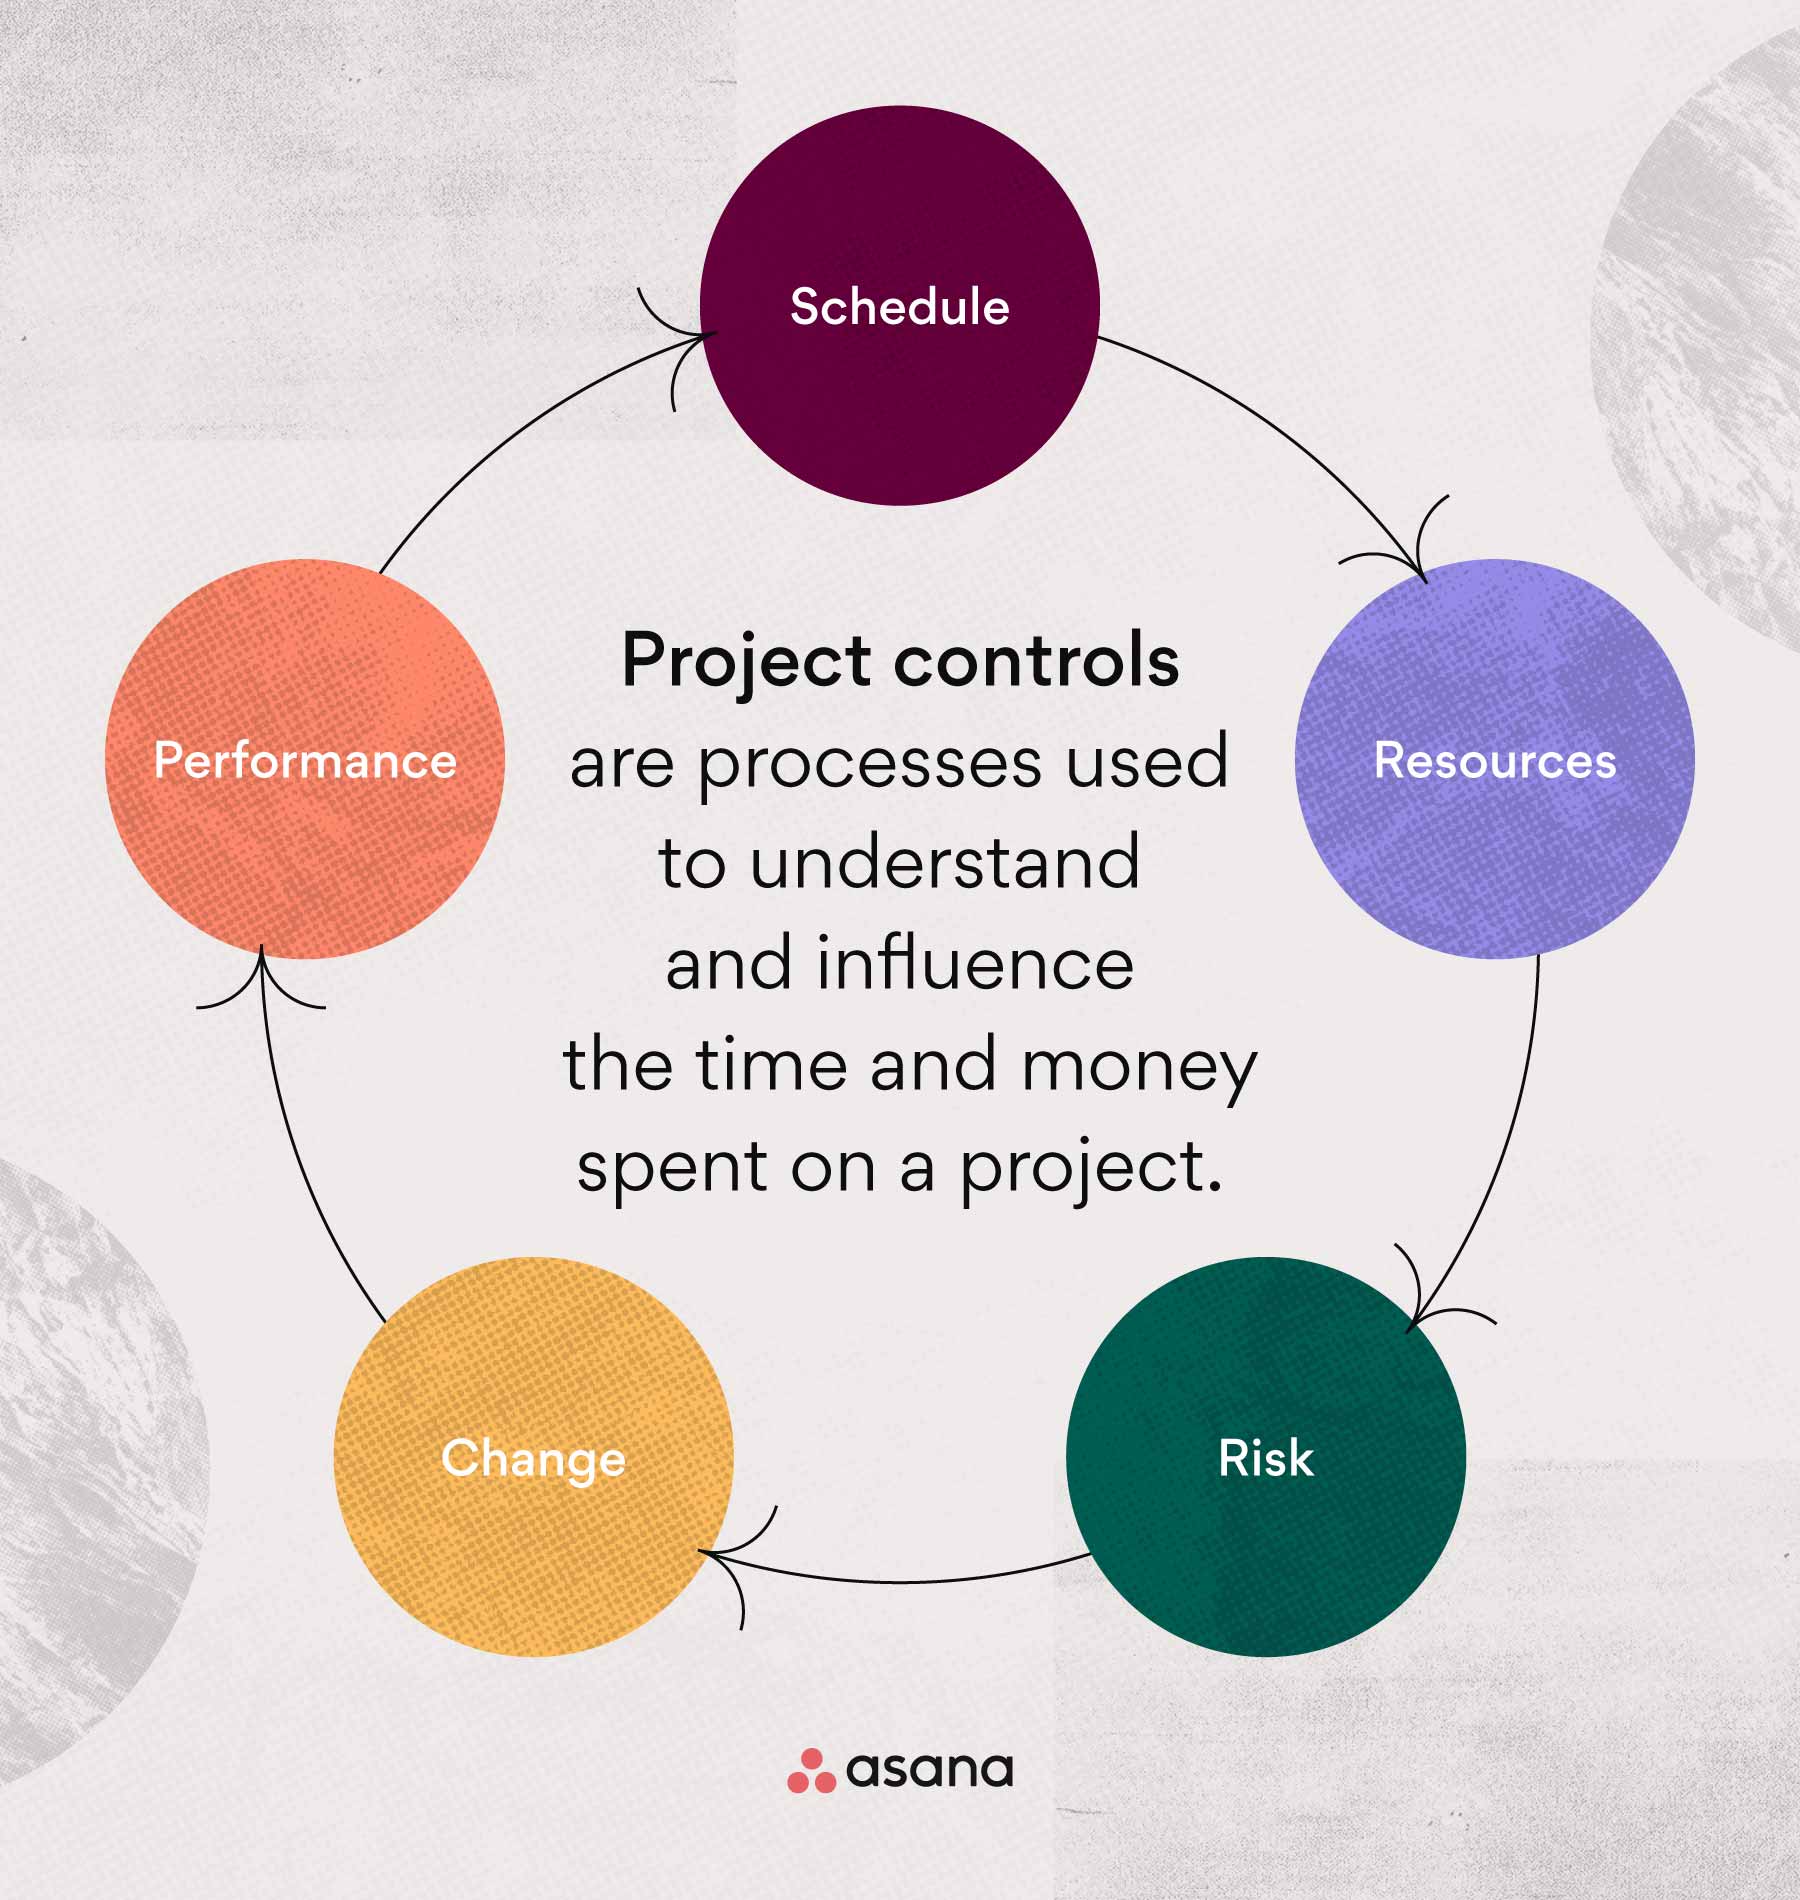 What are project controls in project management?